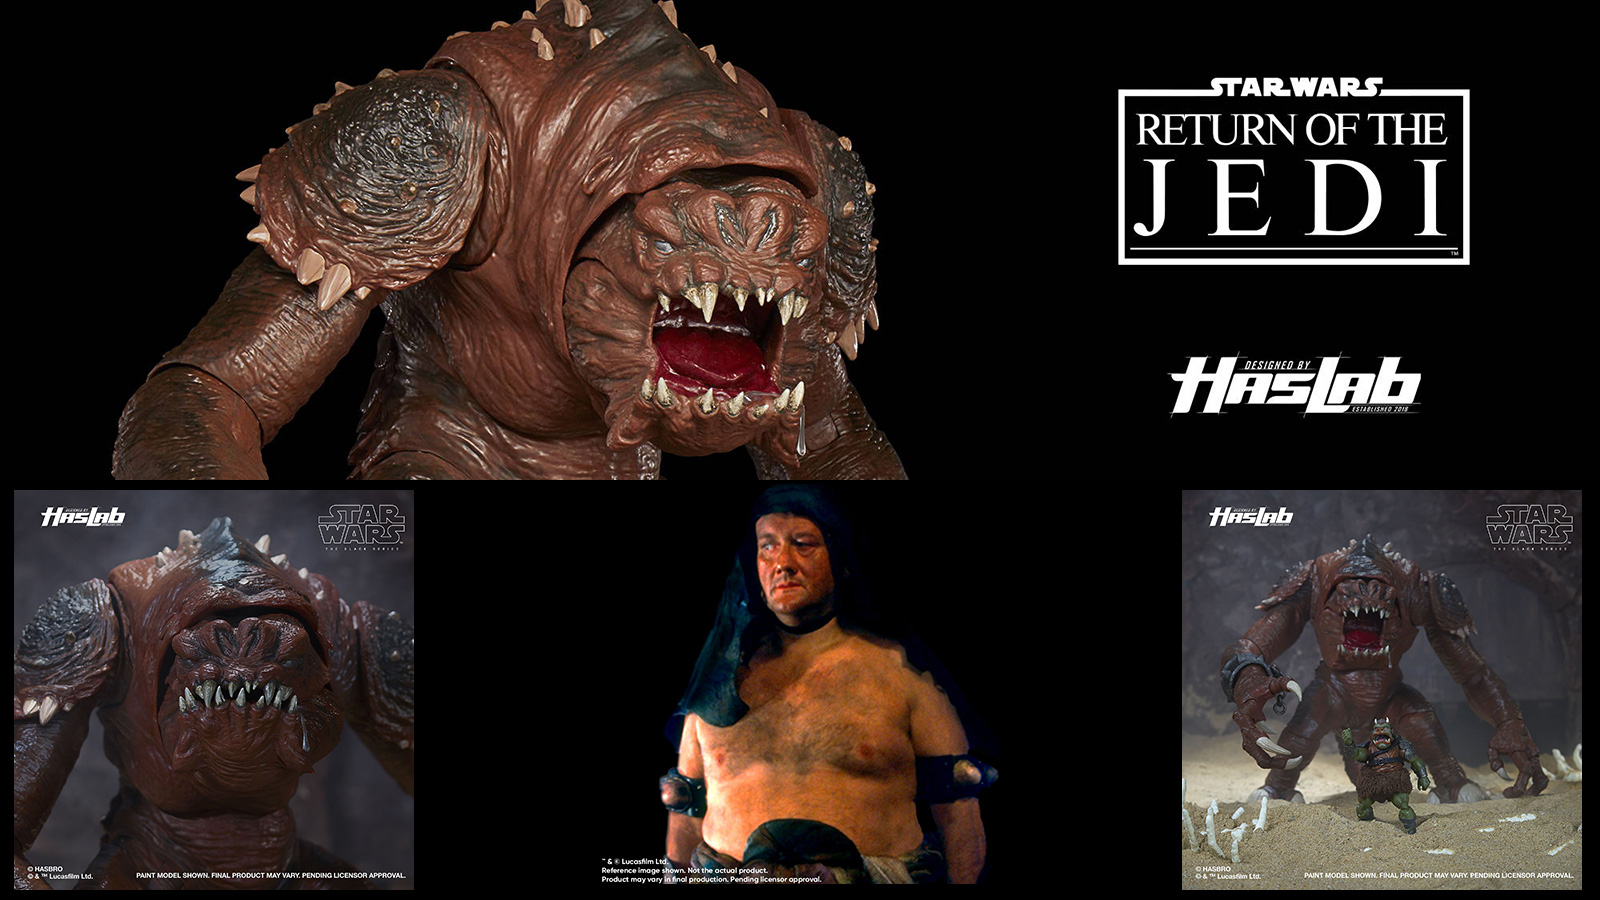 Will HasLab’s The Black Series 6-Inch Rancor with Malakili Figure Fail To Reach 9000 Backers In 3 Days?